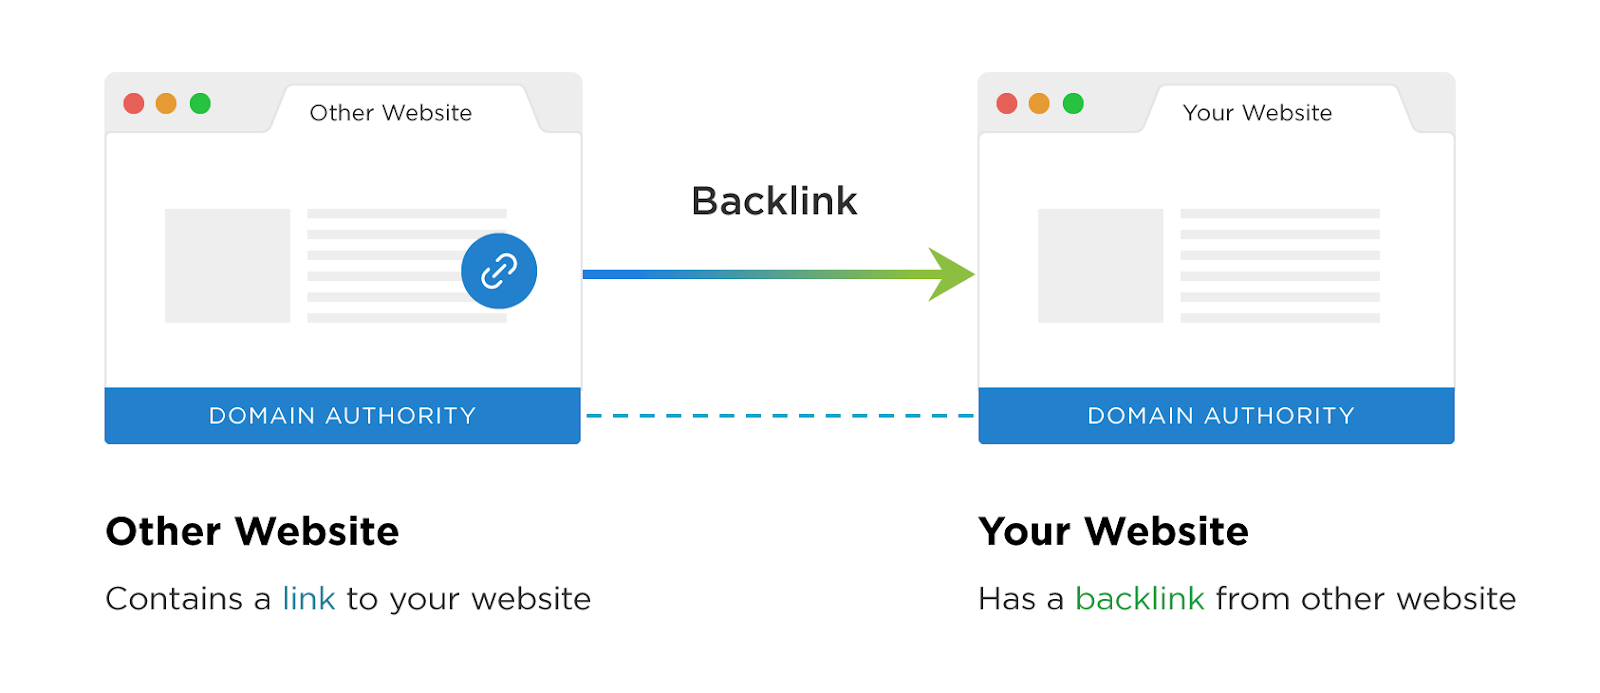 An infographic showing the process of backlinking from an external website.